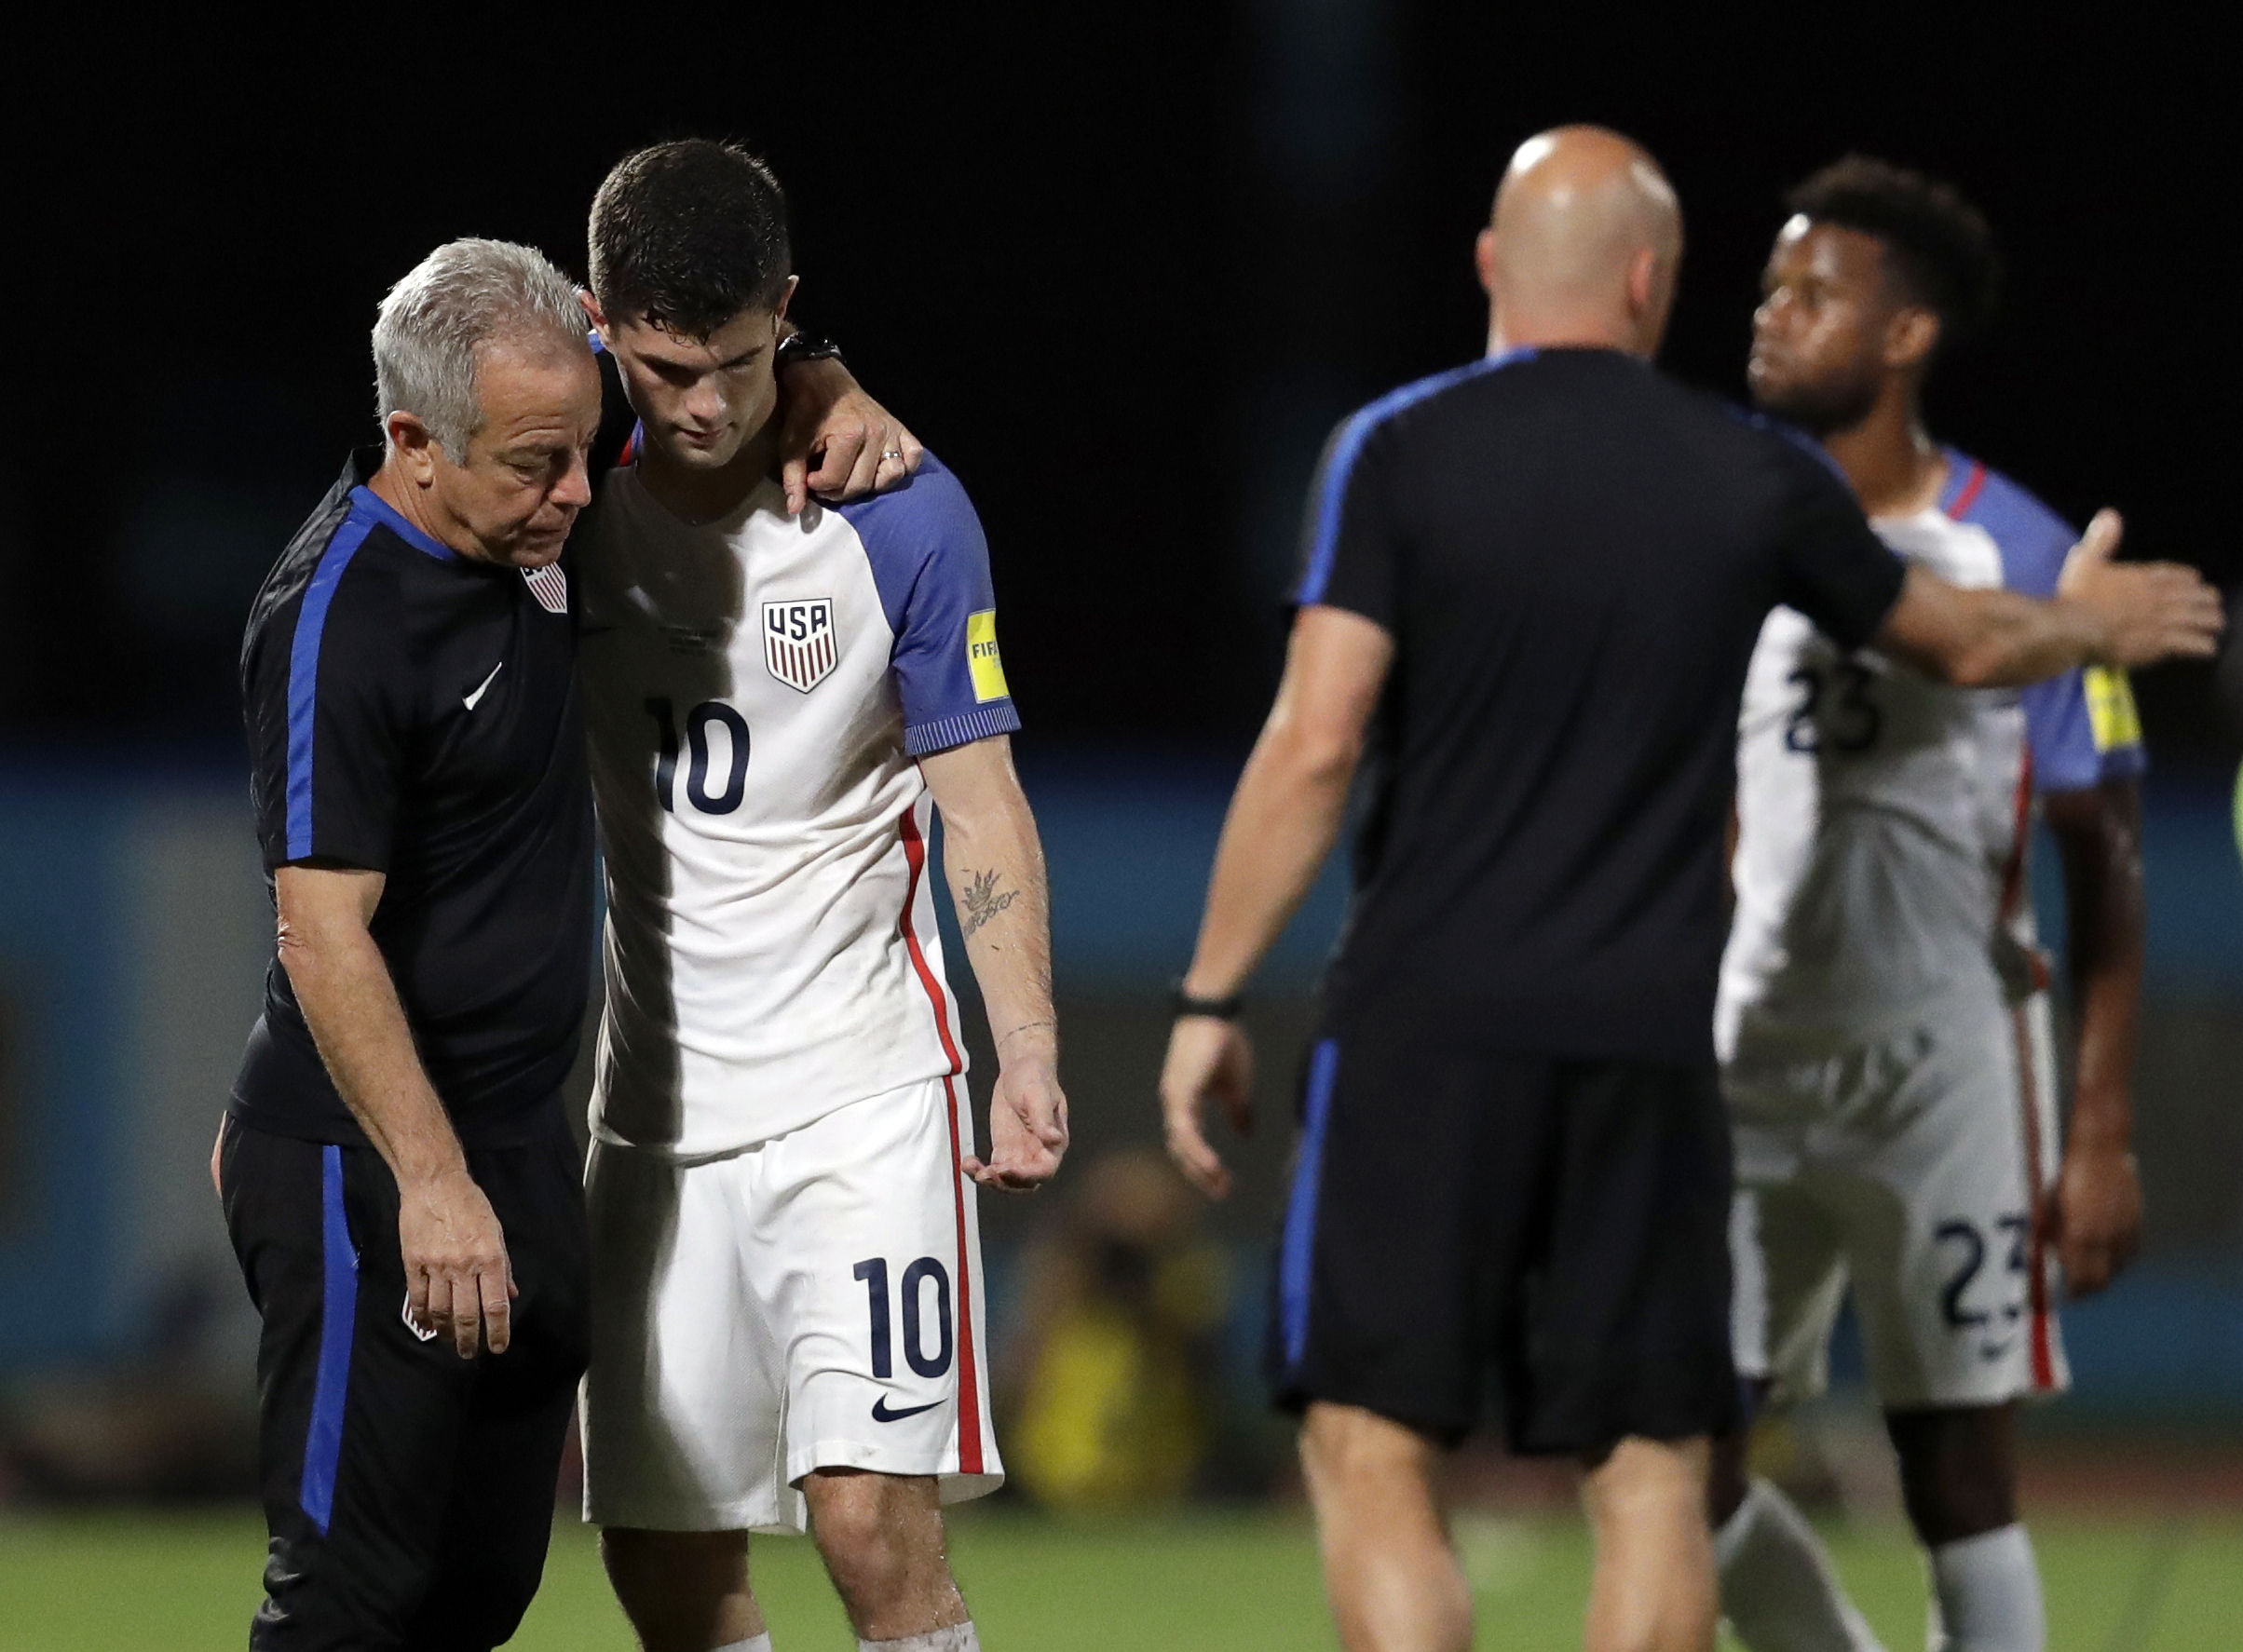 US men's soccer squad gets shot at payback in Gold Cup match